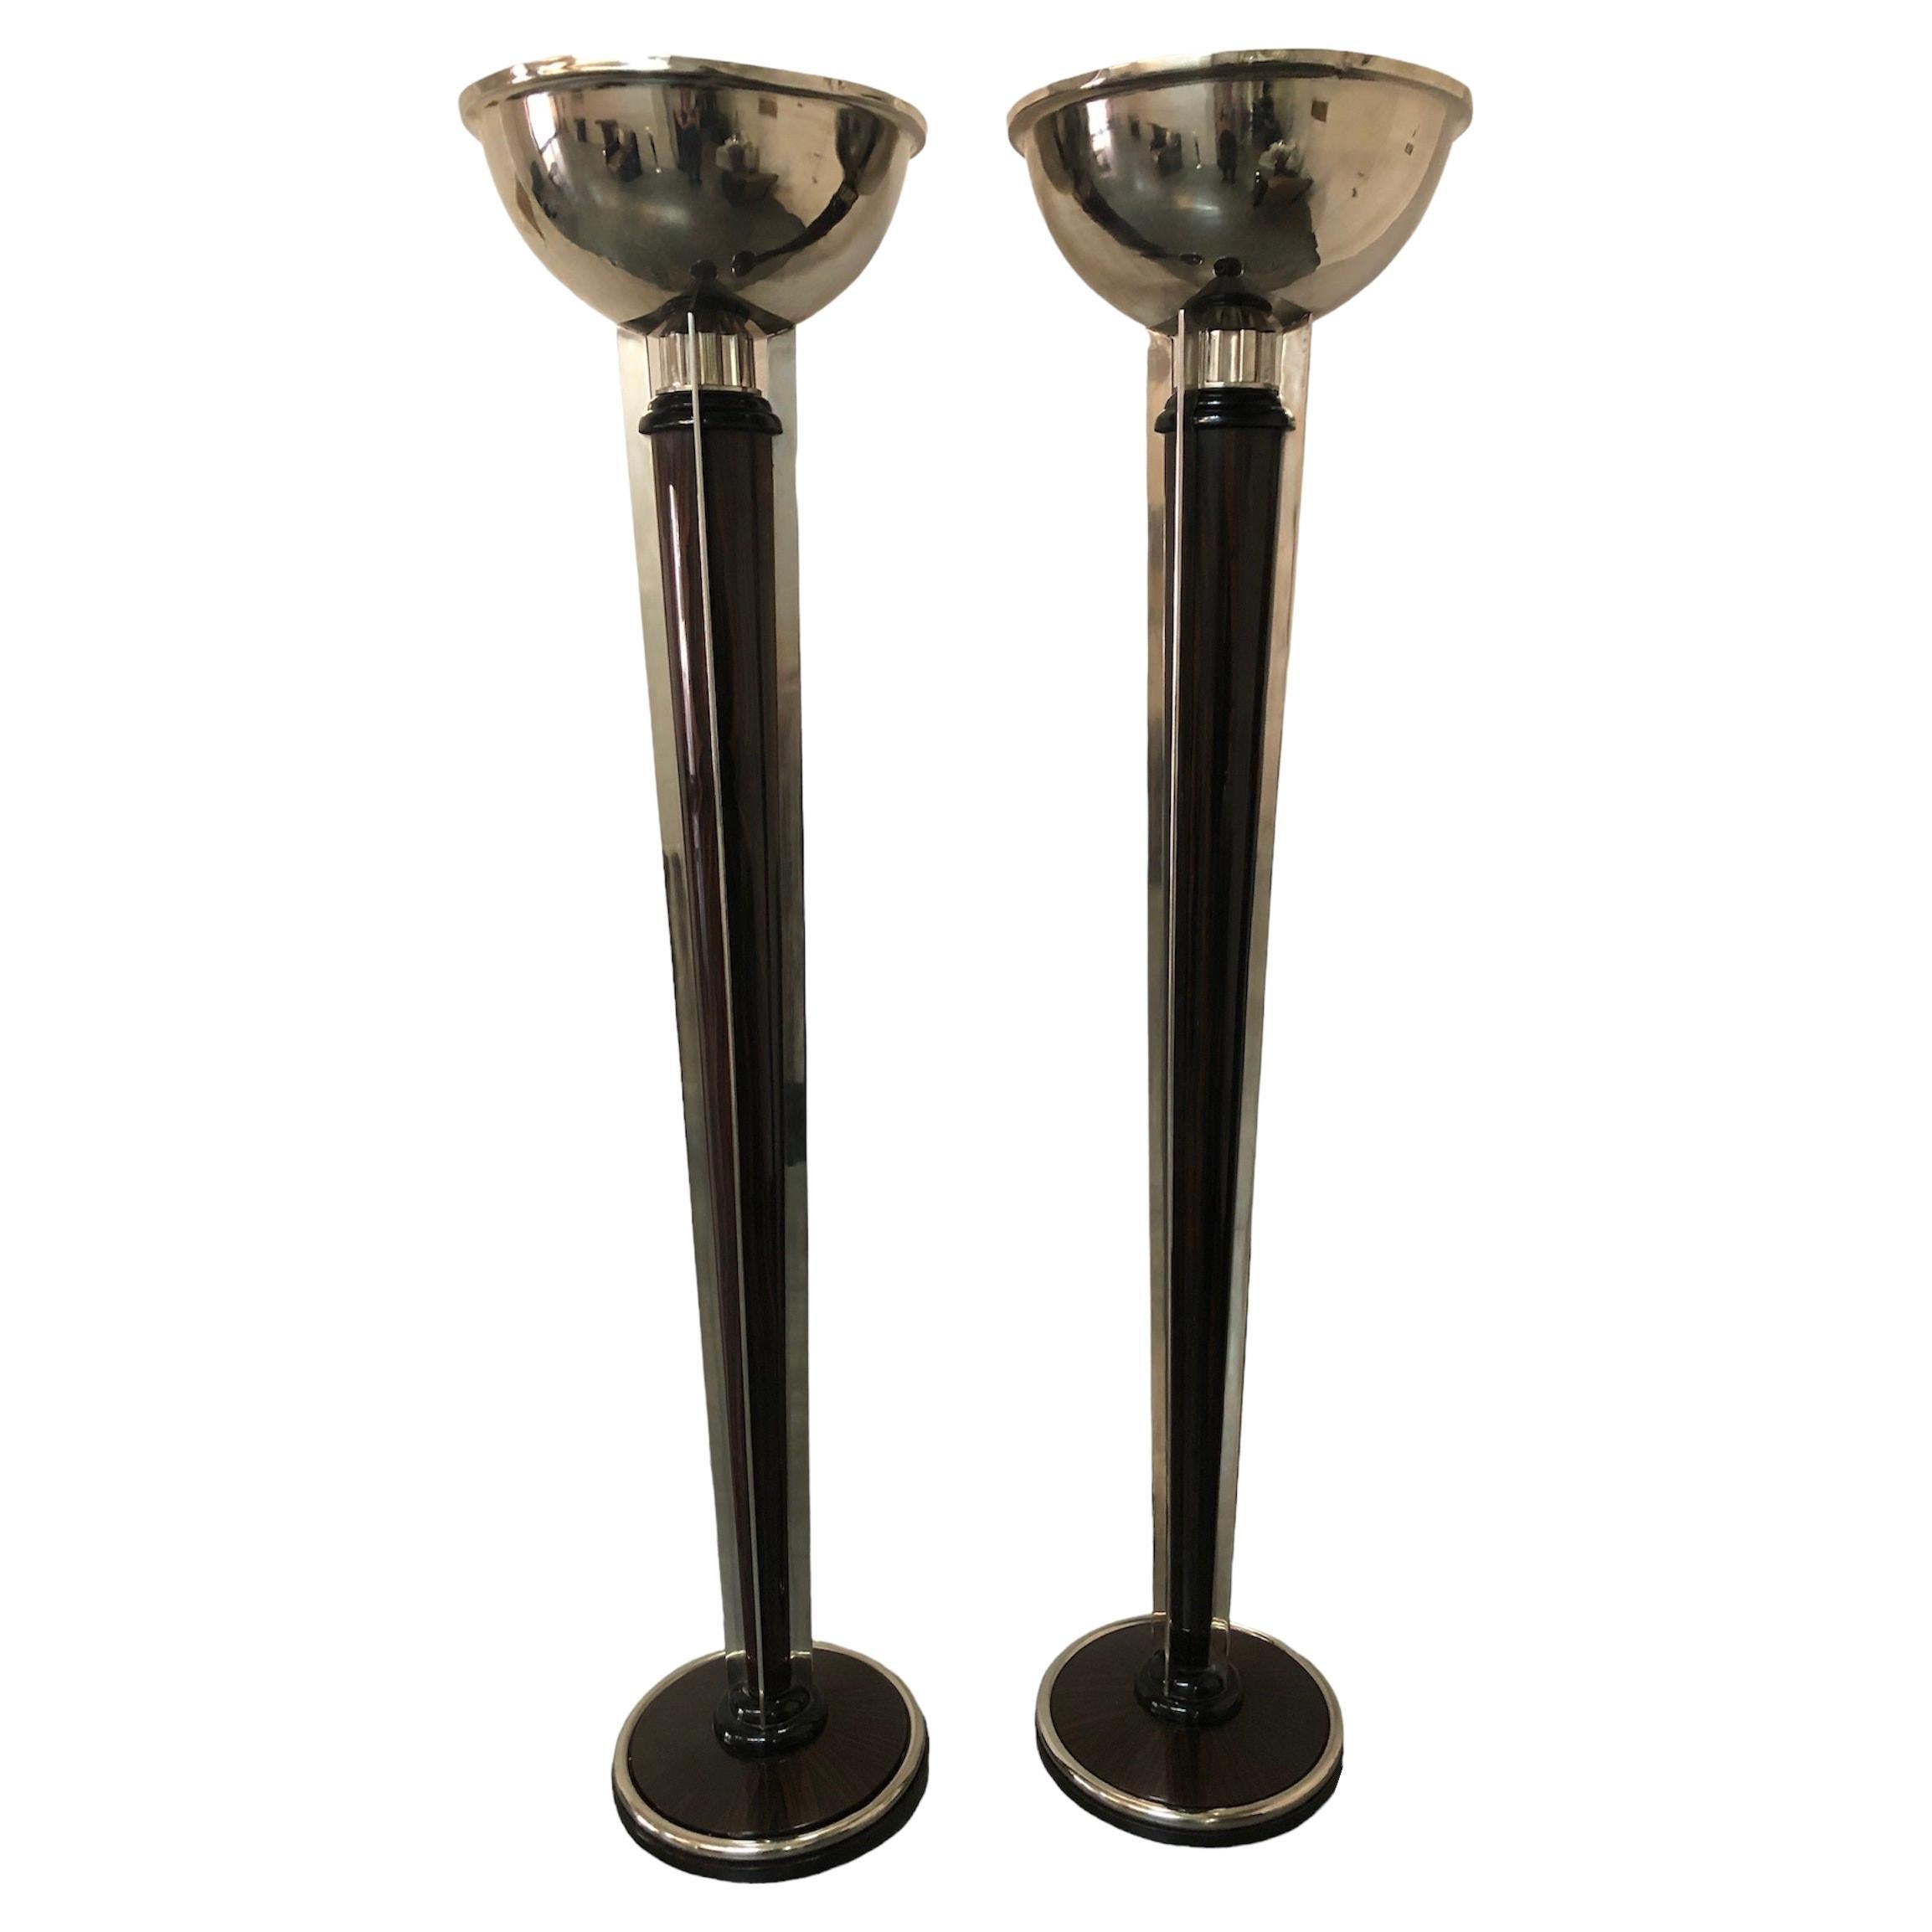 2 Art Deco Floor Lamps, France, Materials: Wood and Chrome, 1930